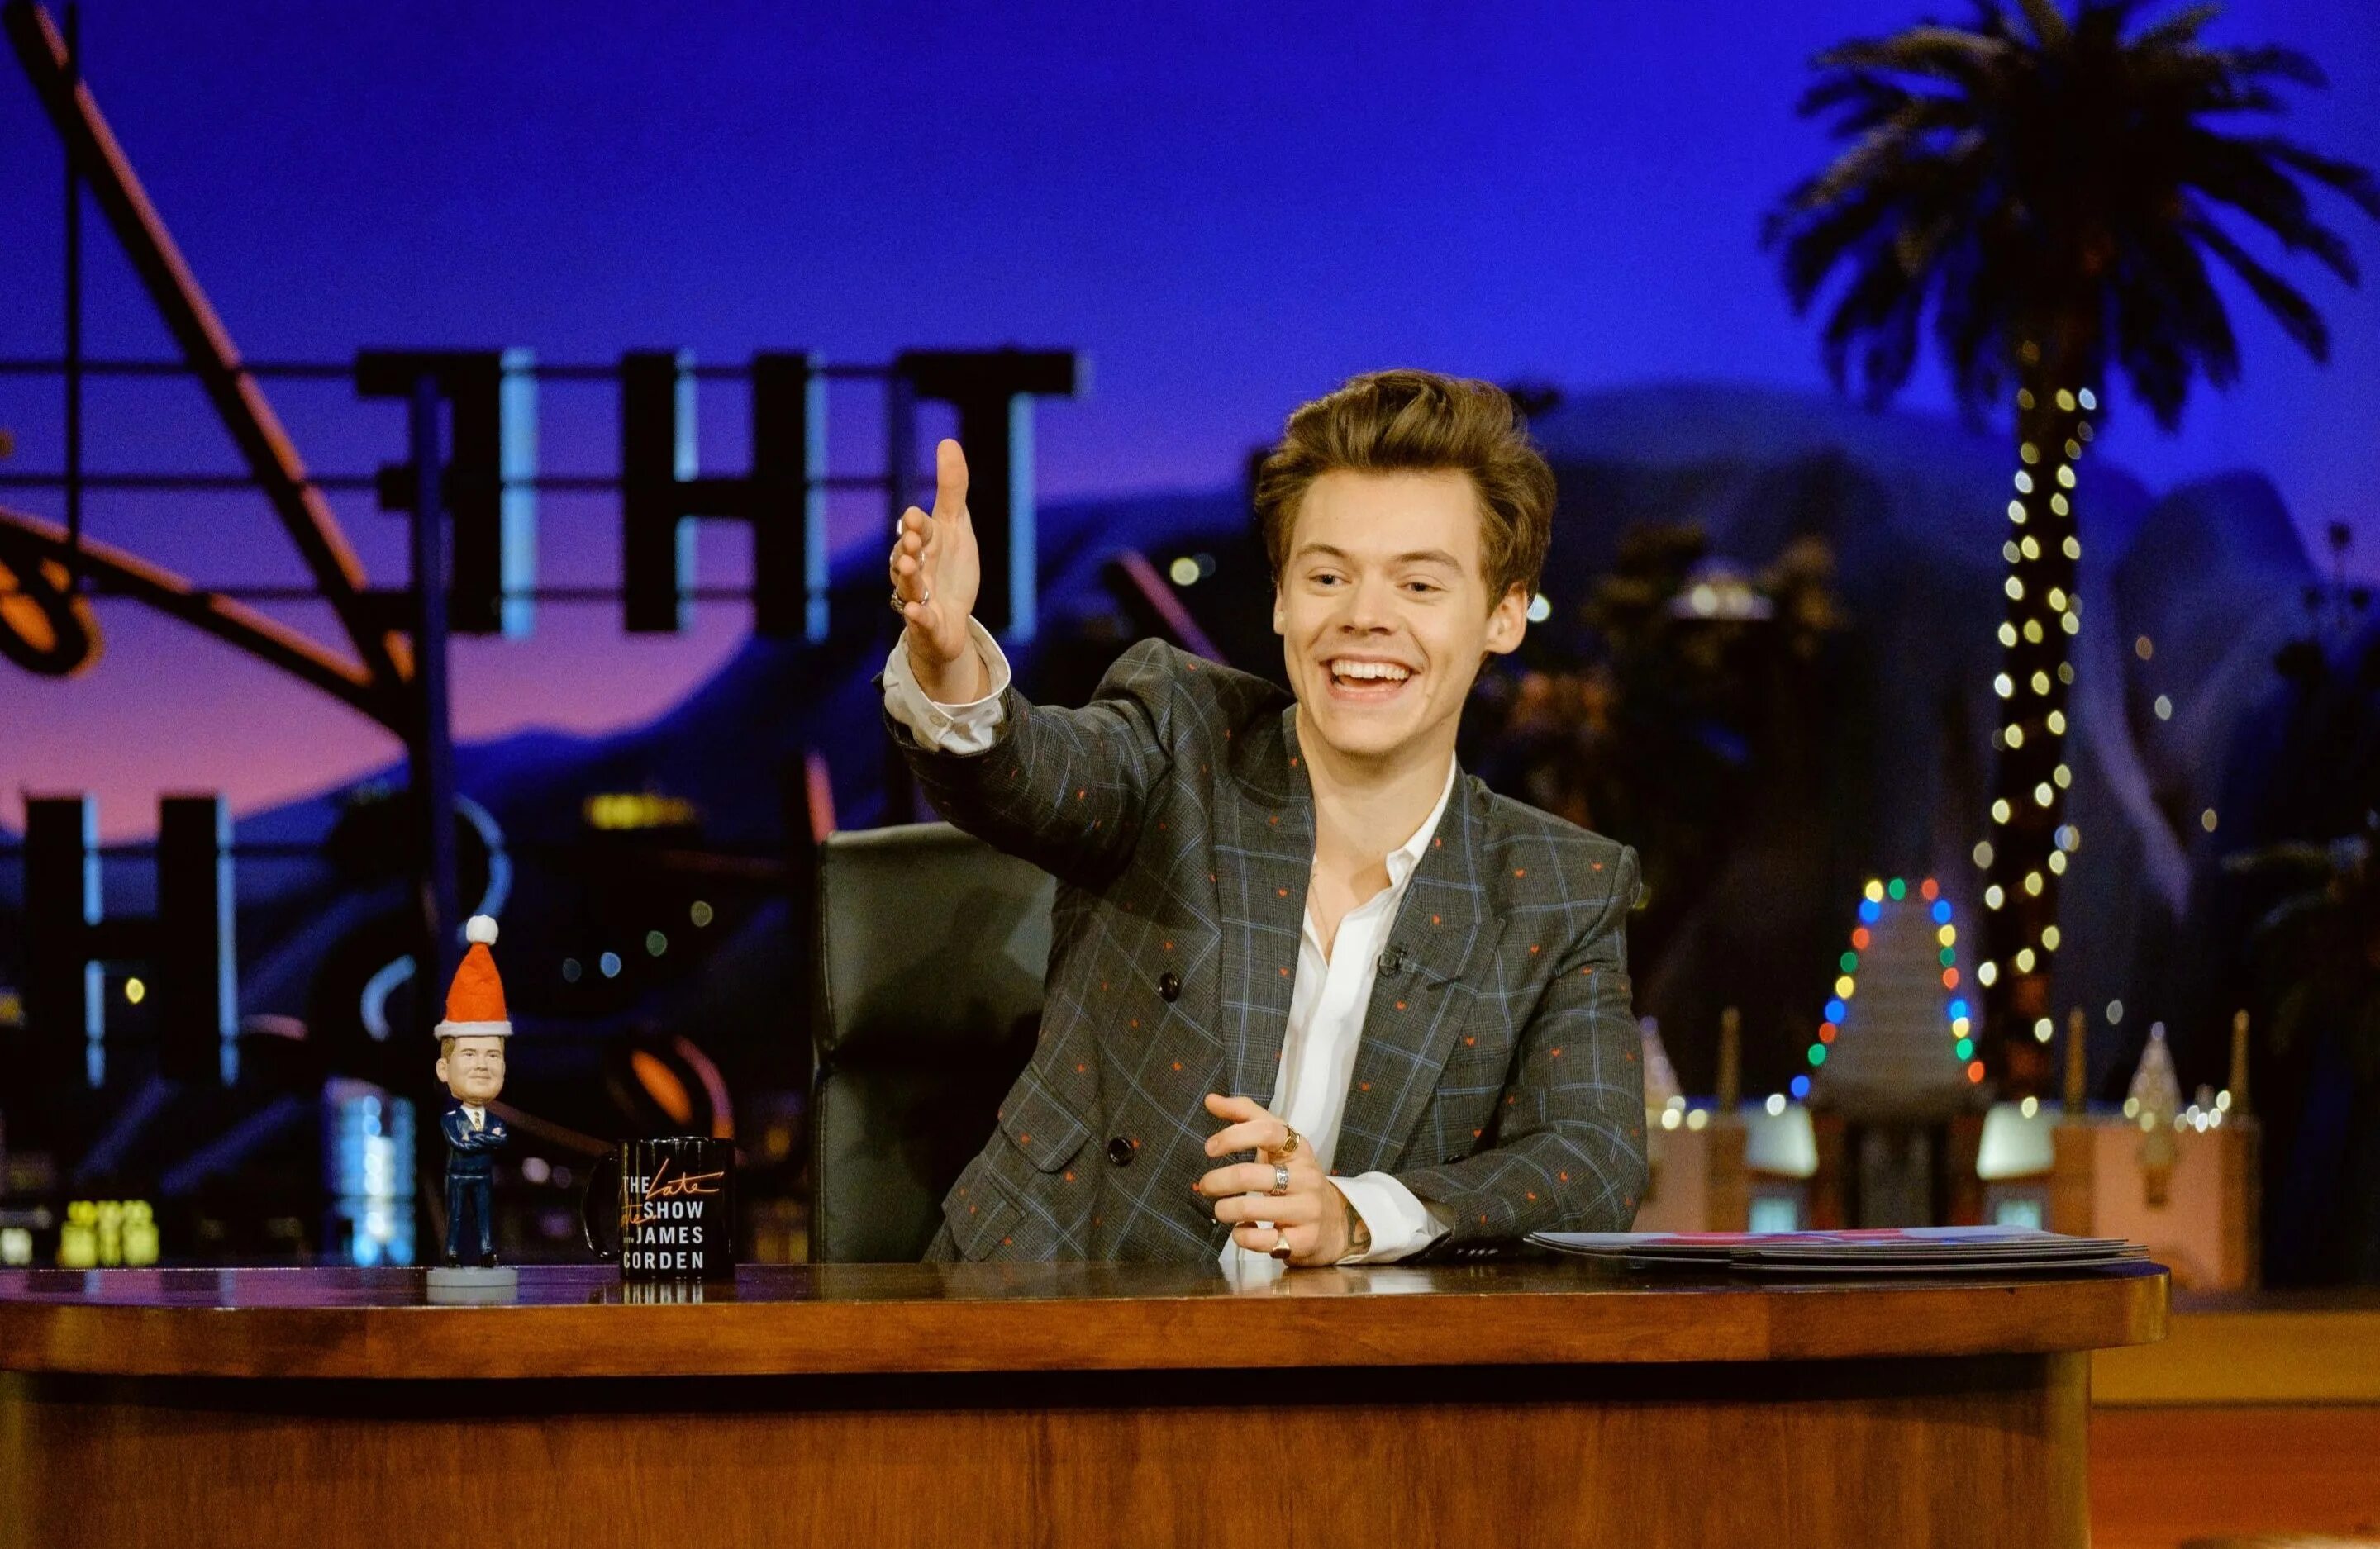 Harry Styles and James Corden. Harry Styles late late show.